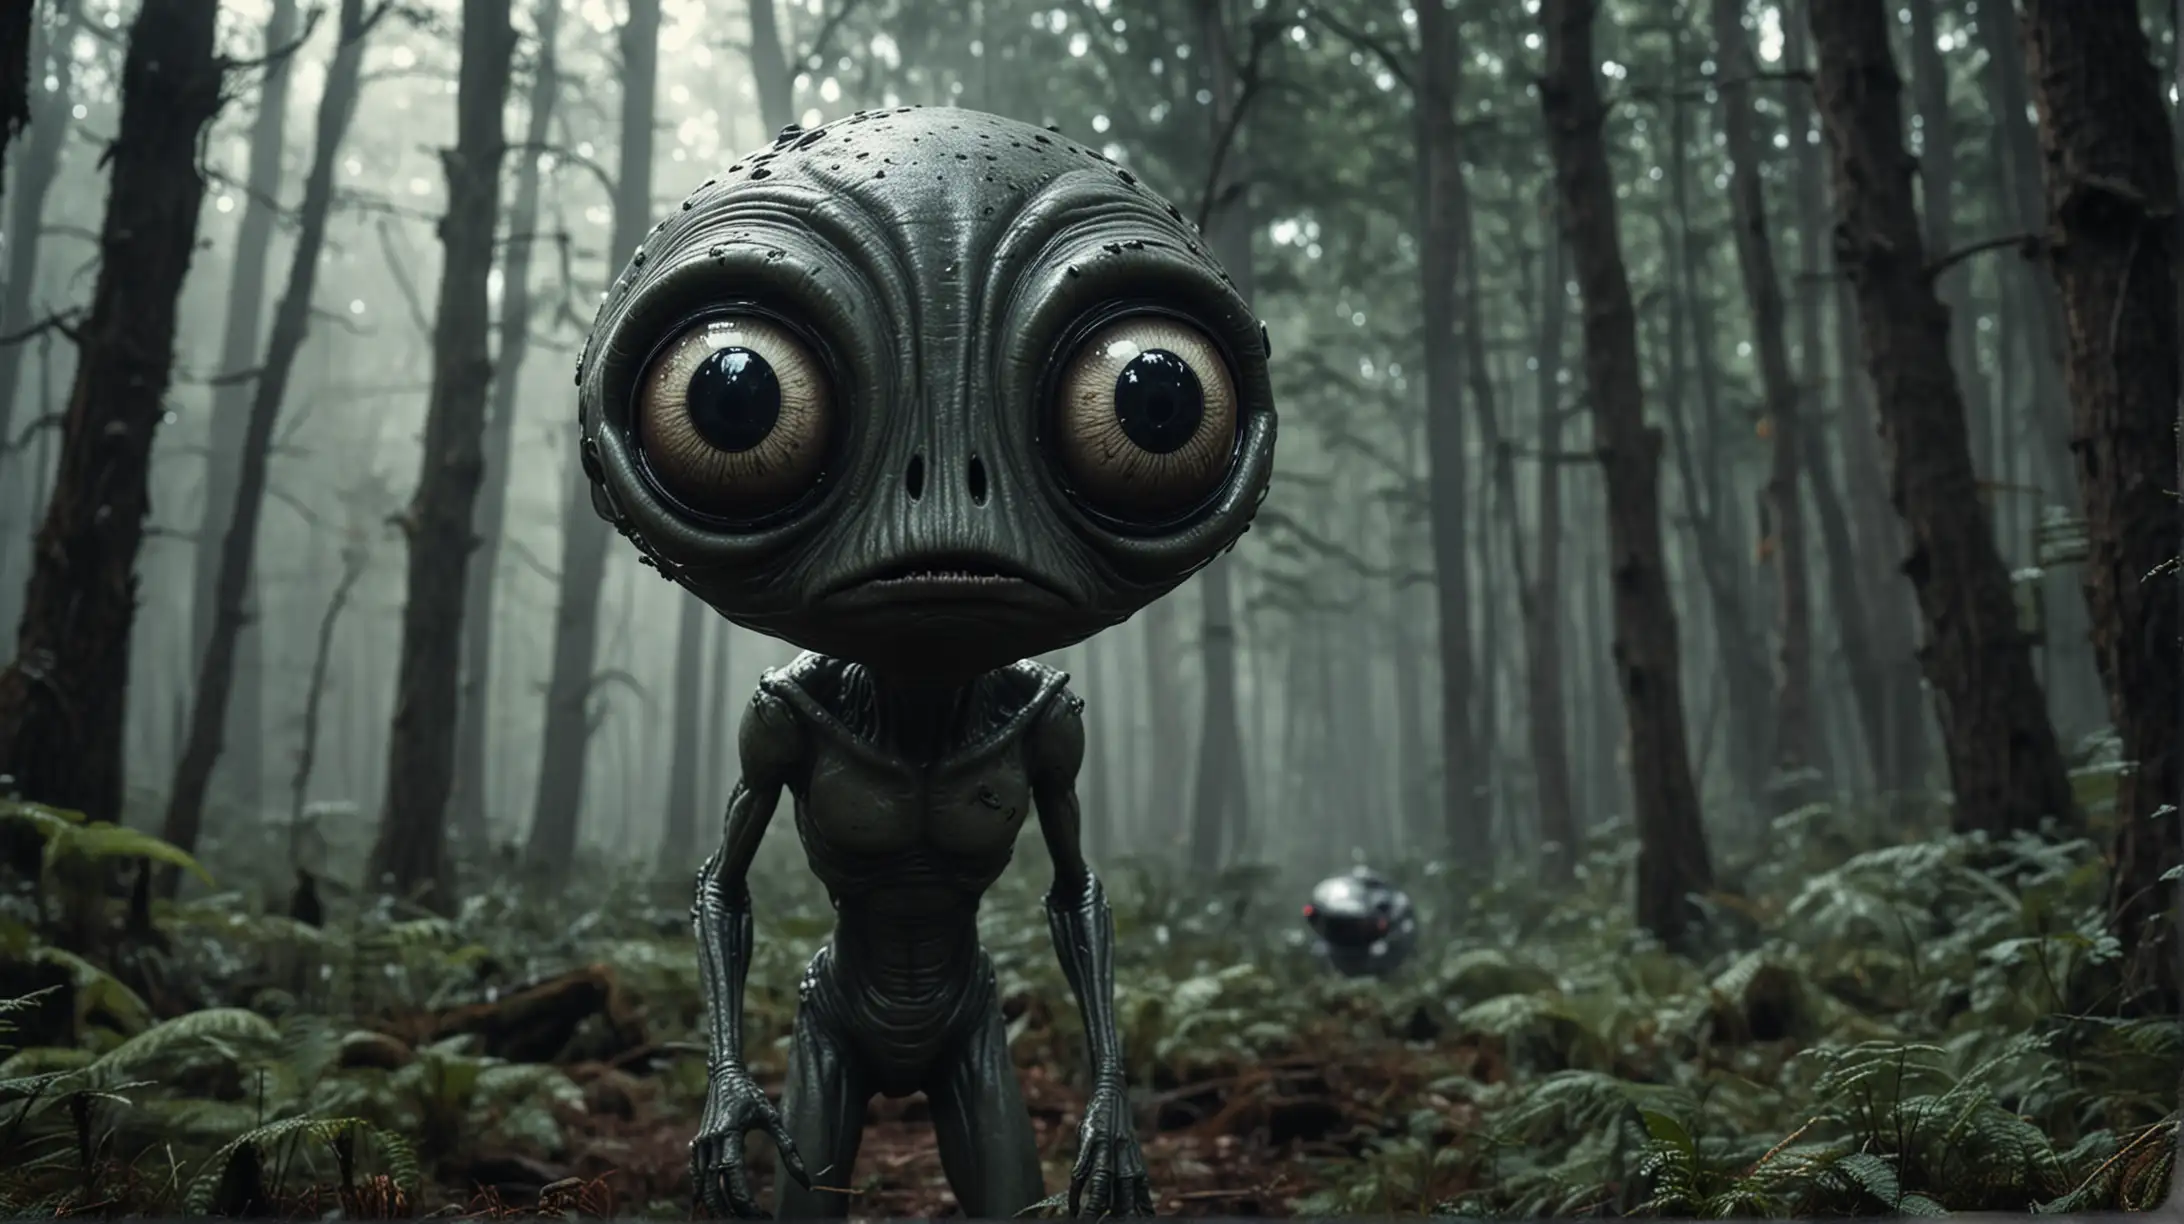 An seemingly scary looking alien with funny googly eyes, in a dark forest with a alien space ship in the background